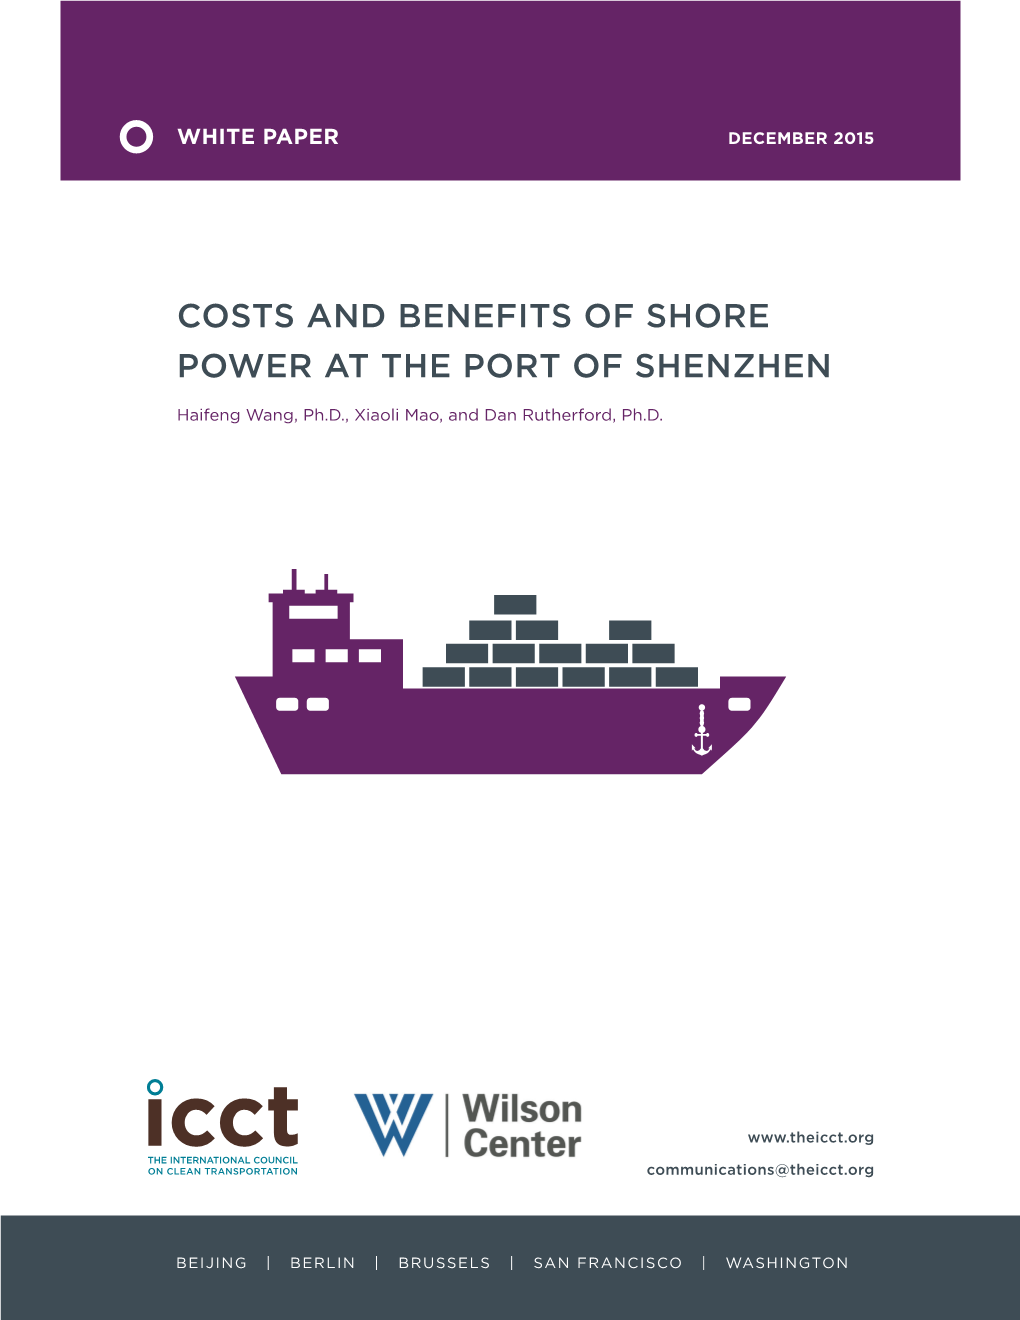 Costs and Benefits of Shore Power at the Port of Shenzhen